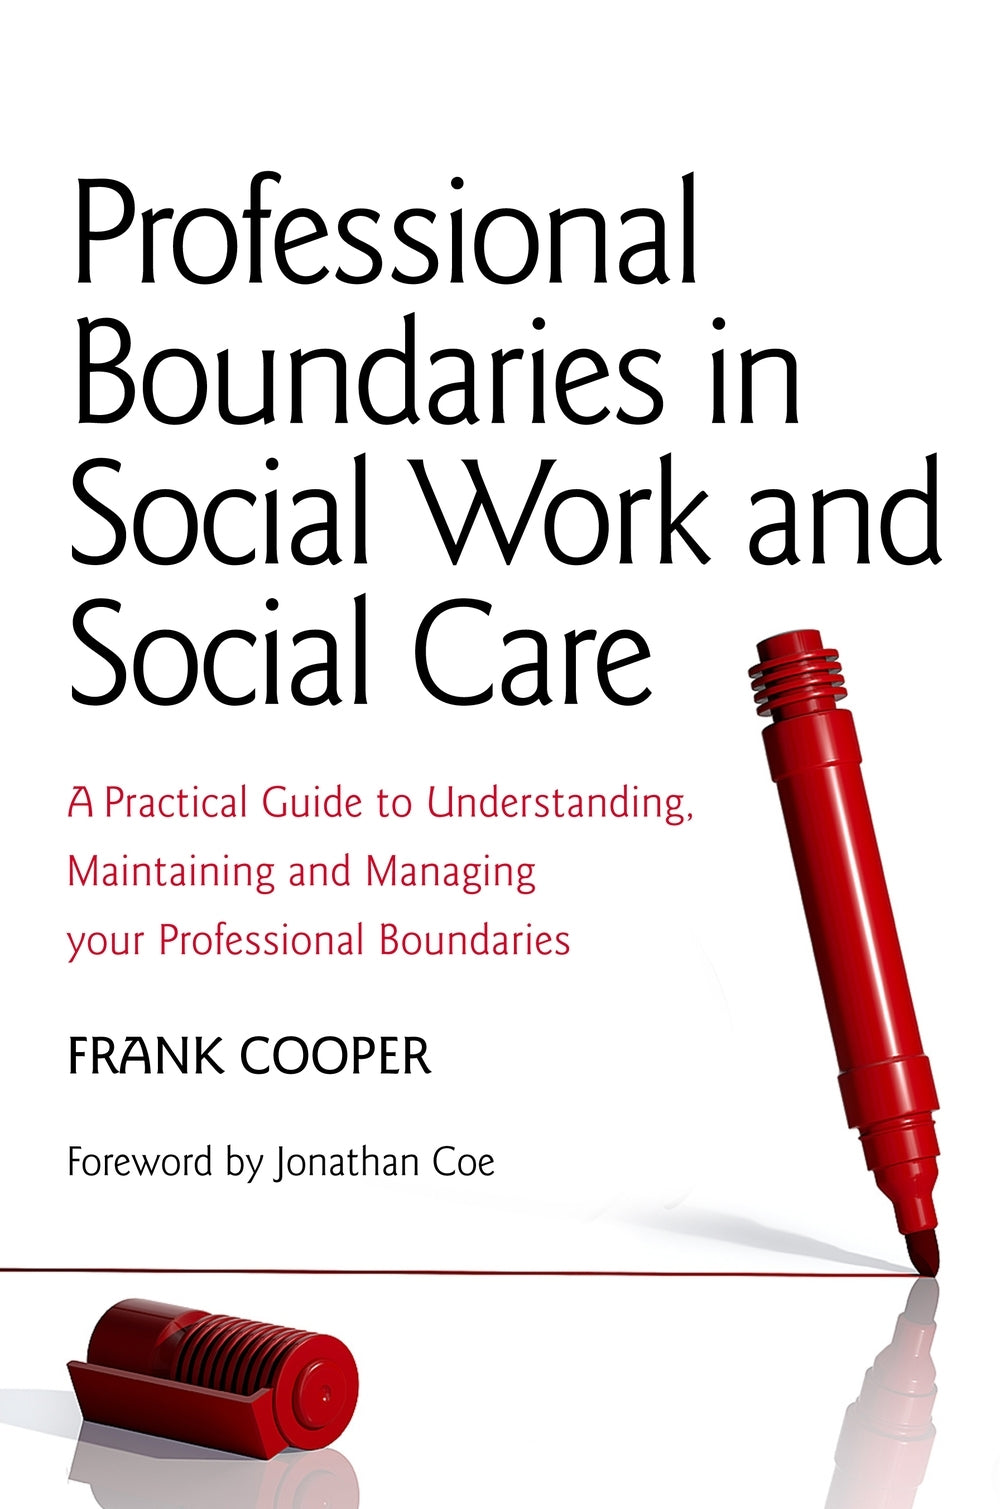 Professional Boundaries in Social Work and Social Care by Frank Cooper